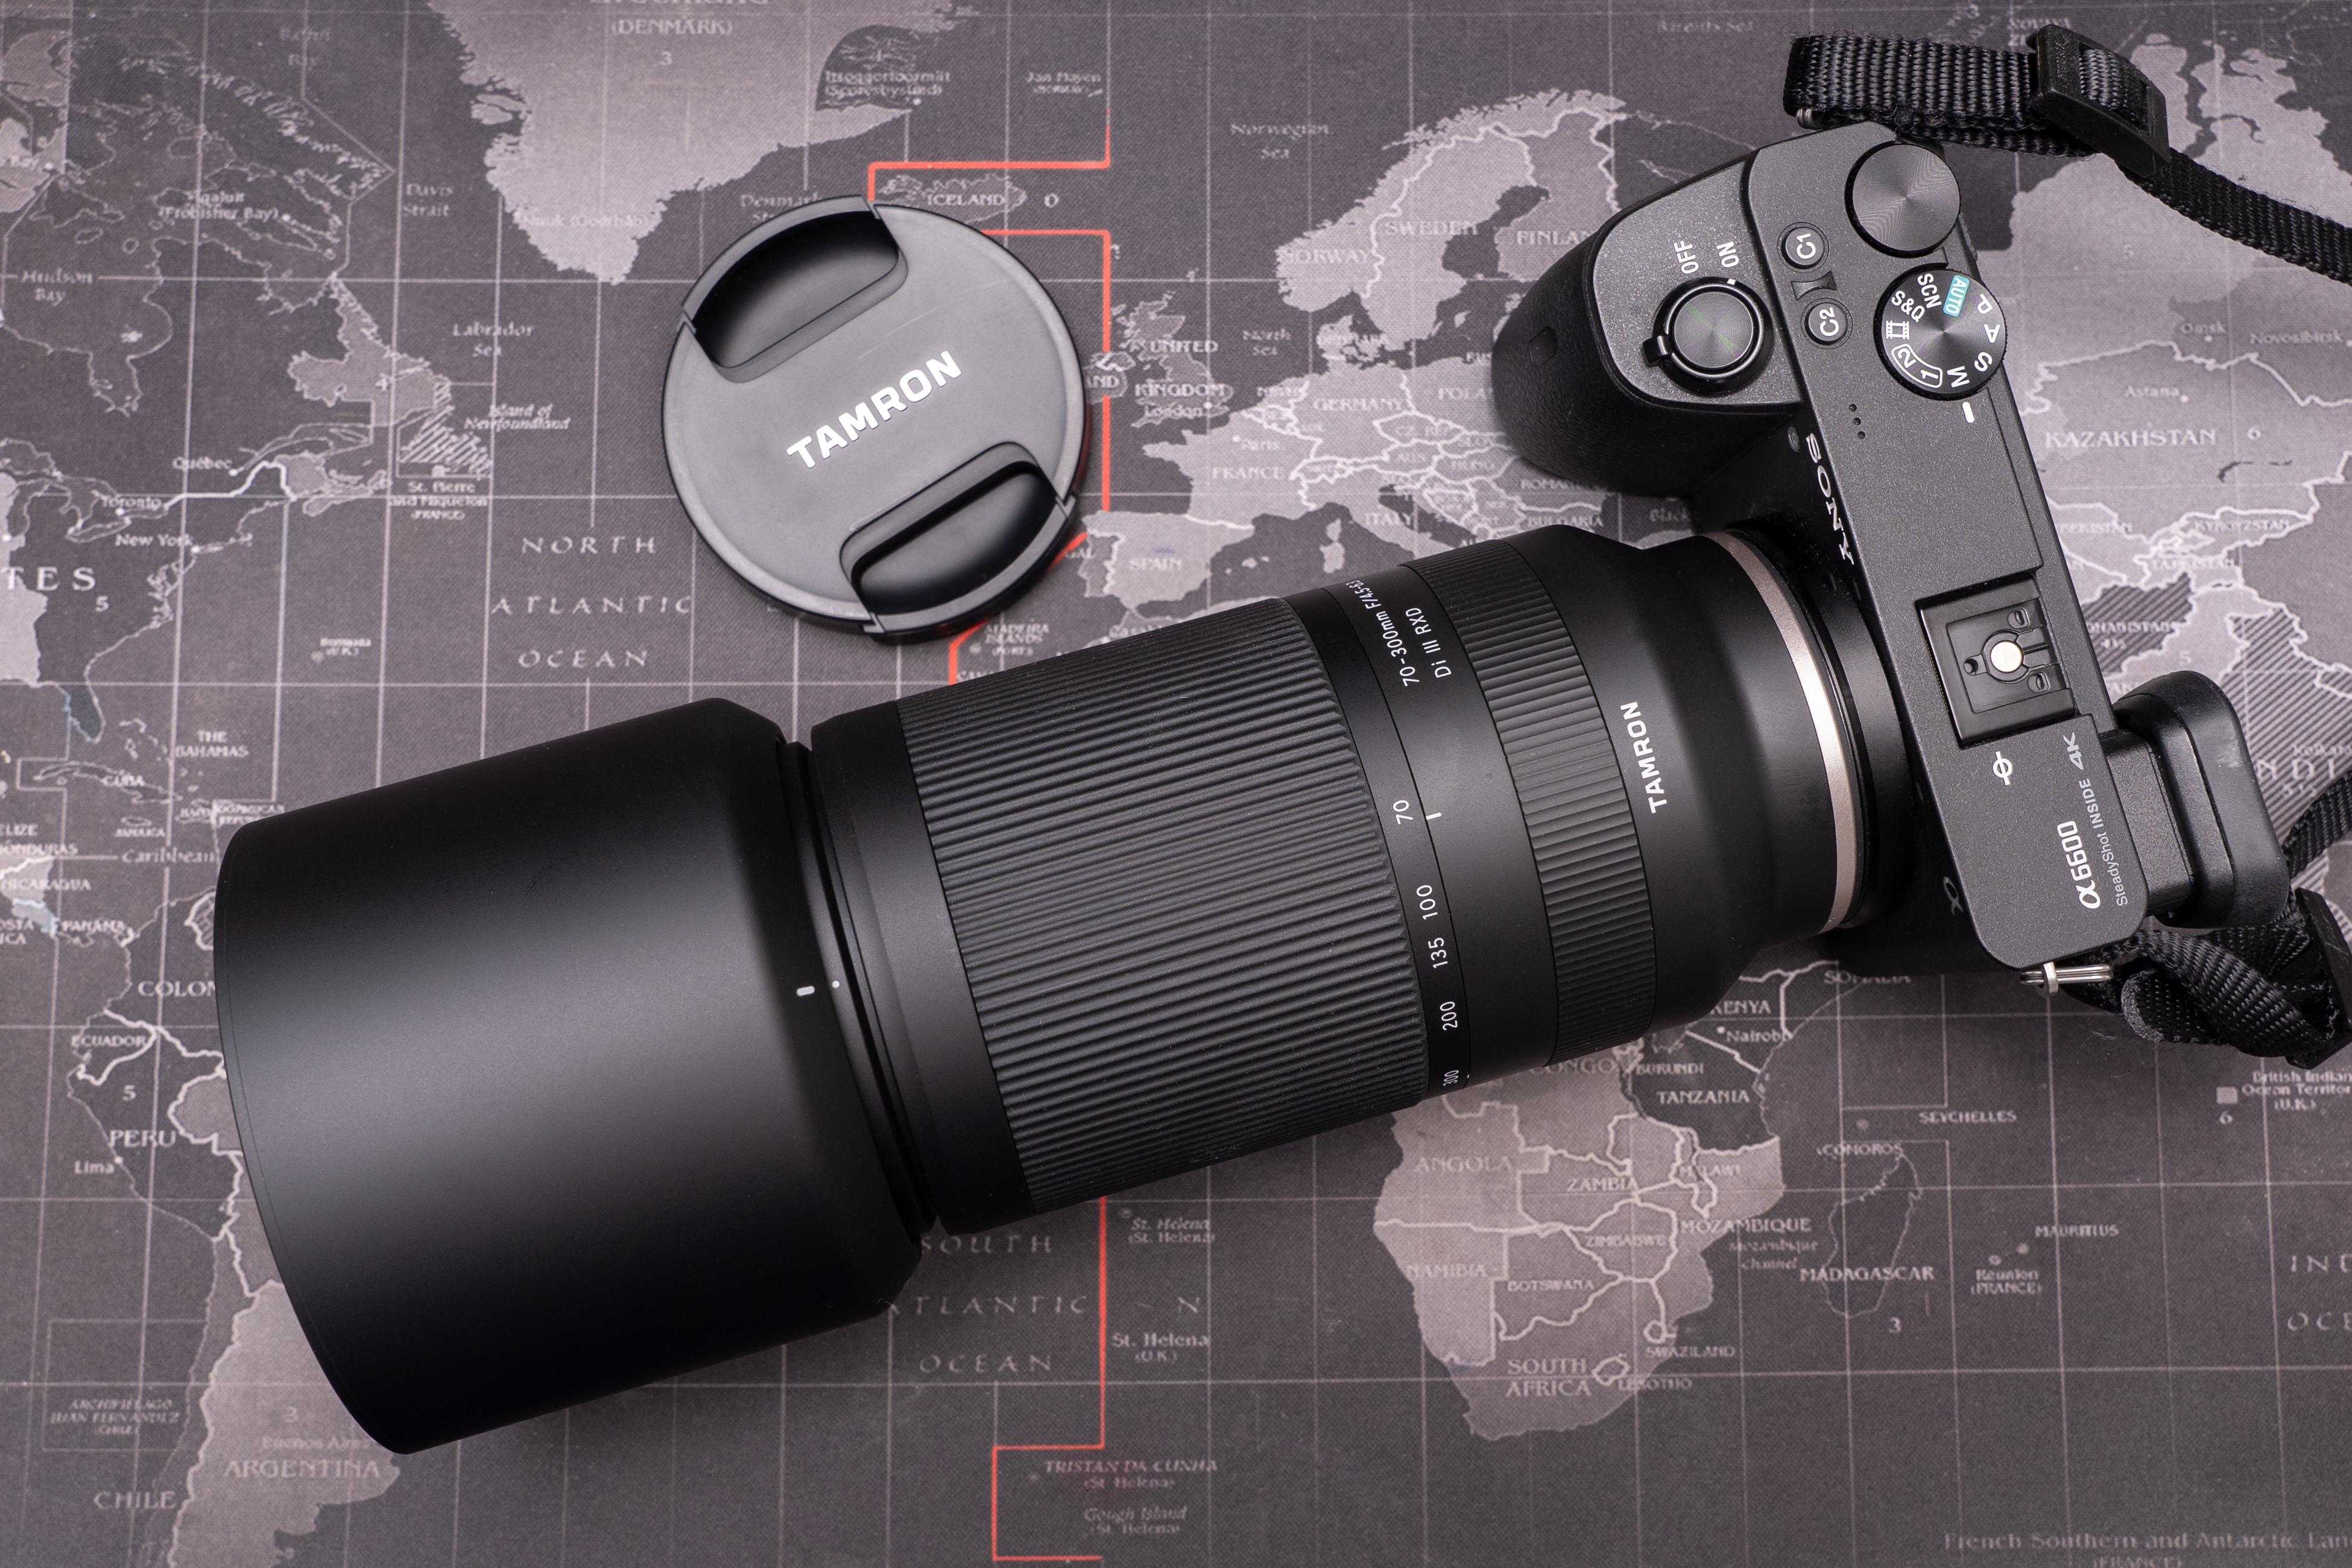 These Four Tamron Lenses Have a Discount. Pick One Up!